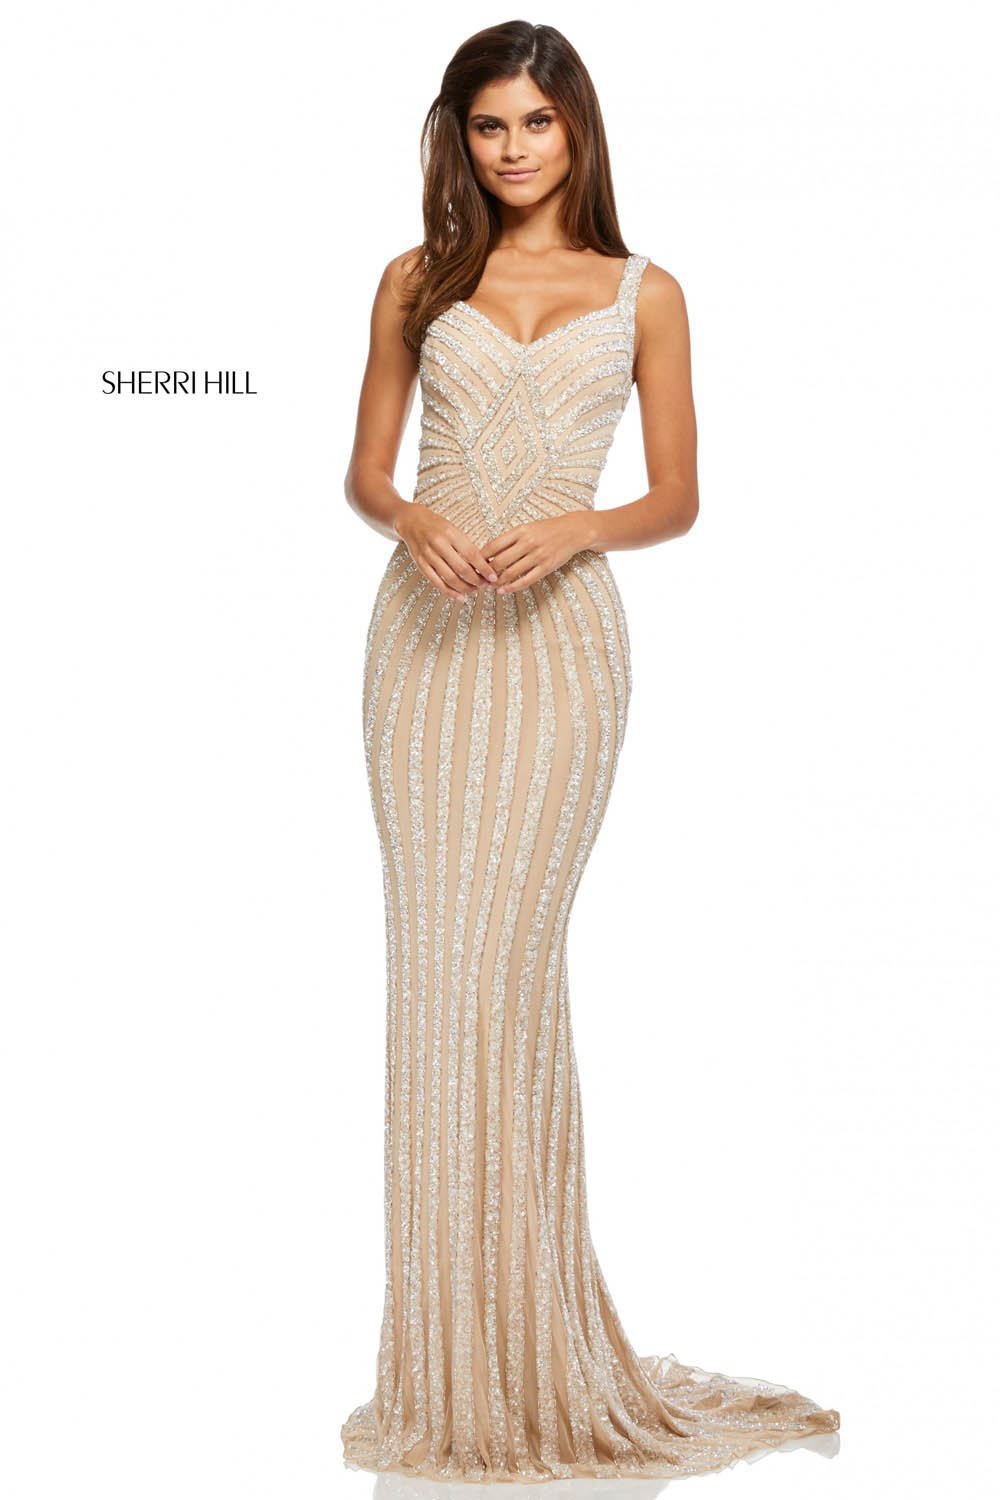 Sherri Hill 52563 dress images in these colors: Nude Silver, Burgundy, Navy, Black, Nude Gold, Ivory.